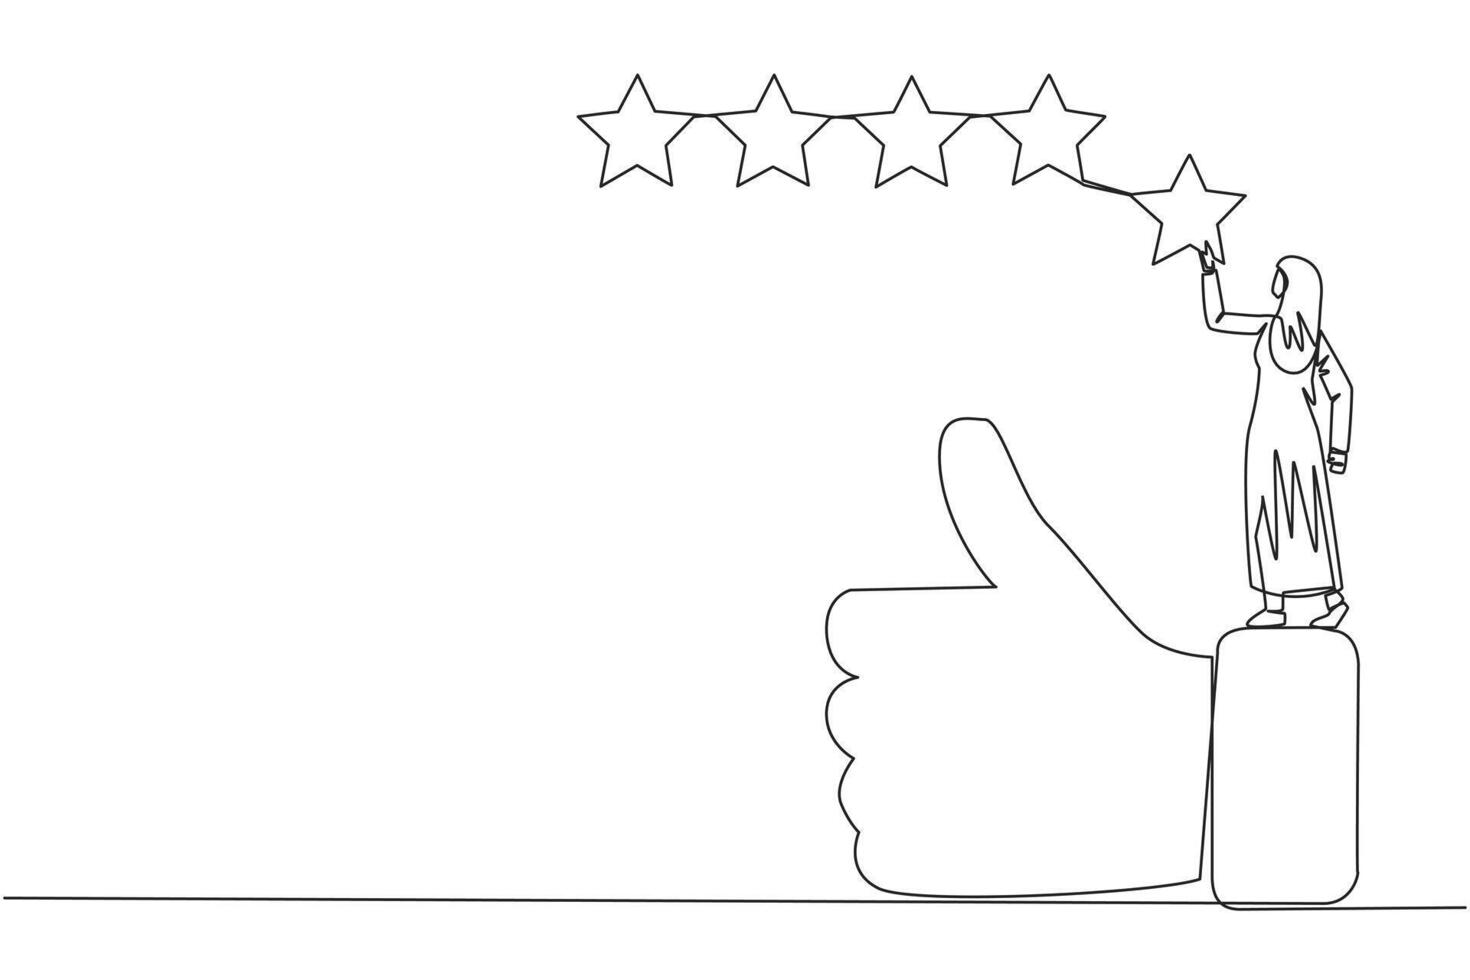 Single one line drawing young happy Arabian woman standing on thumbs up wants to attach the stars to form 5 stars in a row. Give review or good feedback. Continuous line design graphic illustration vector